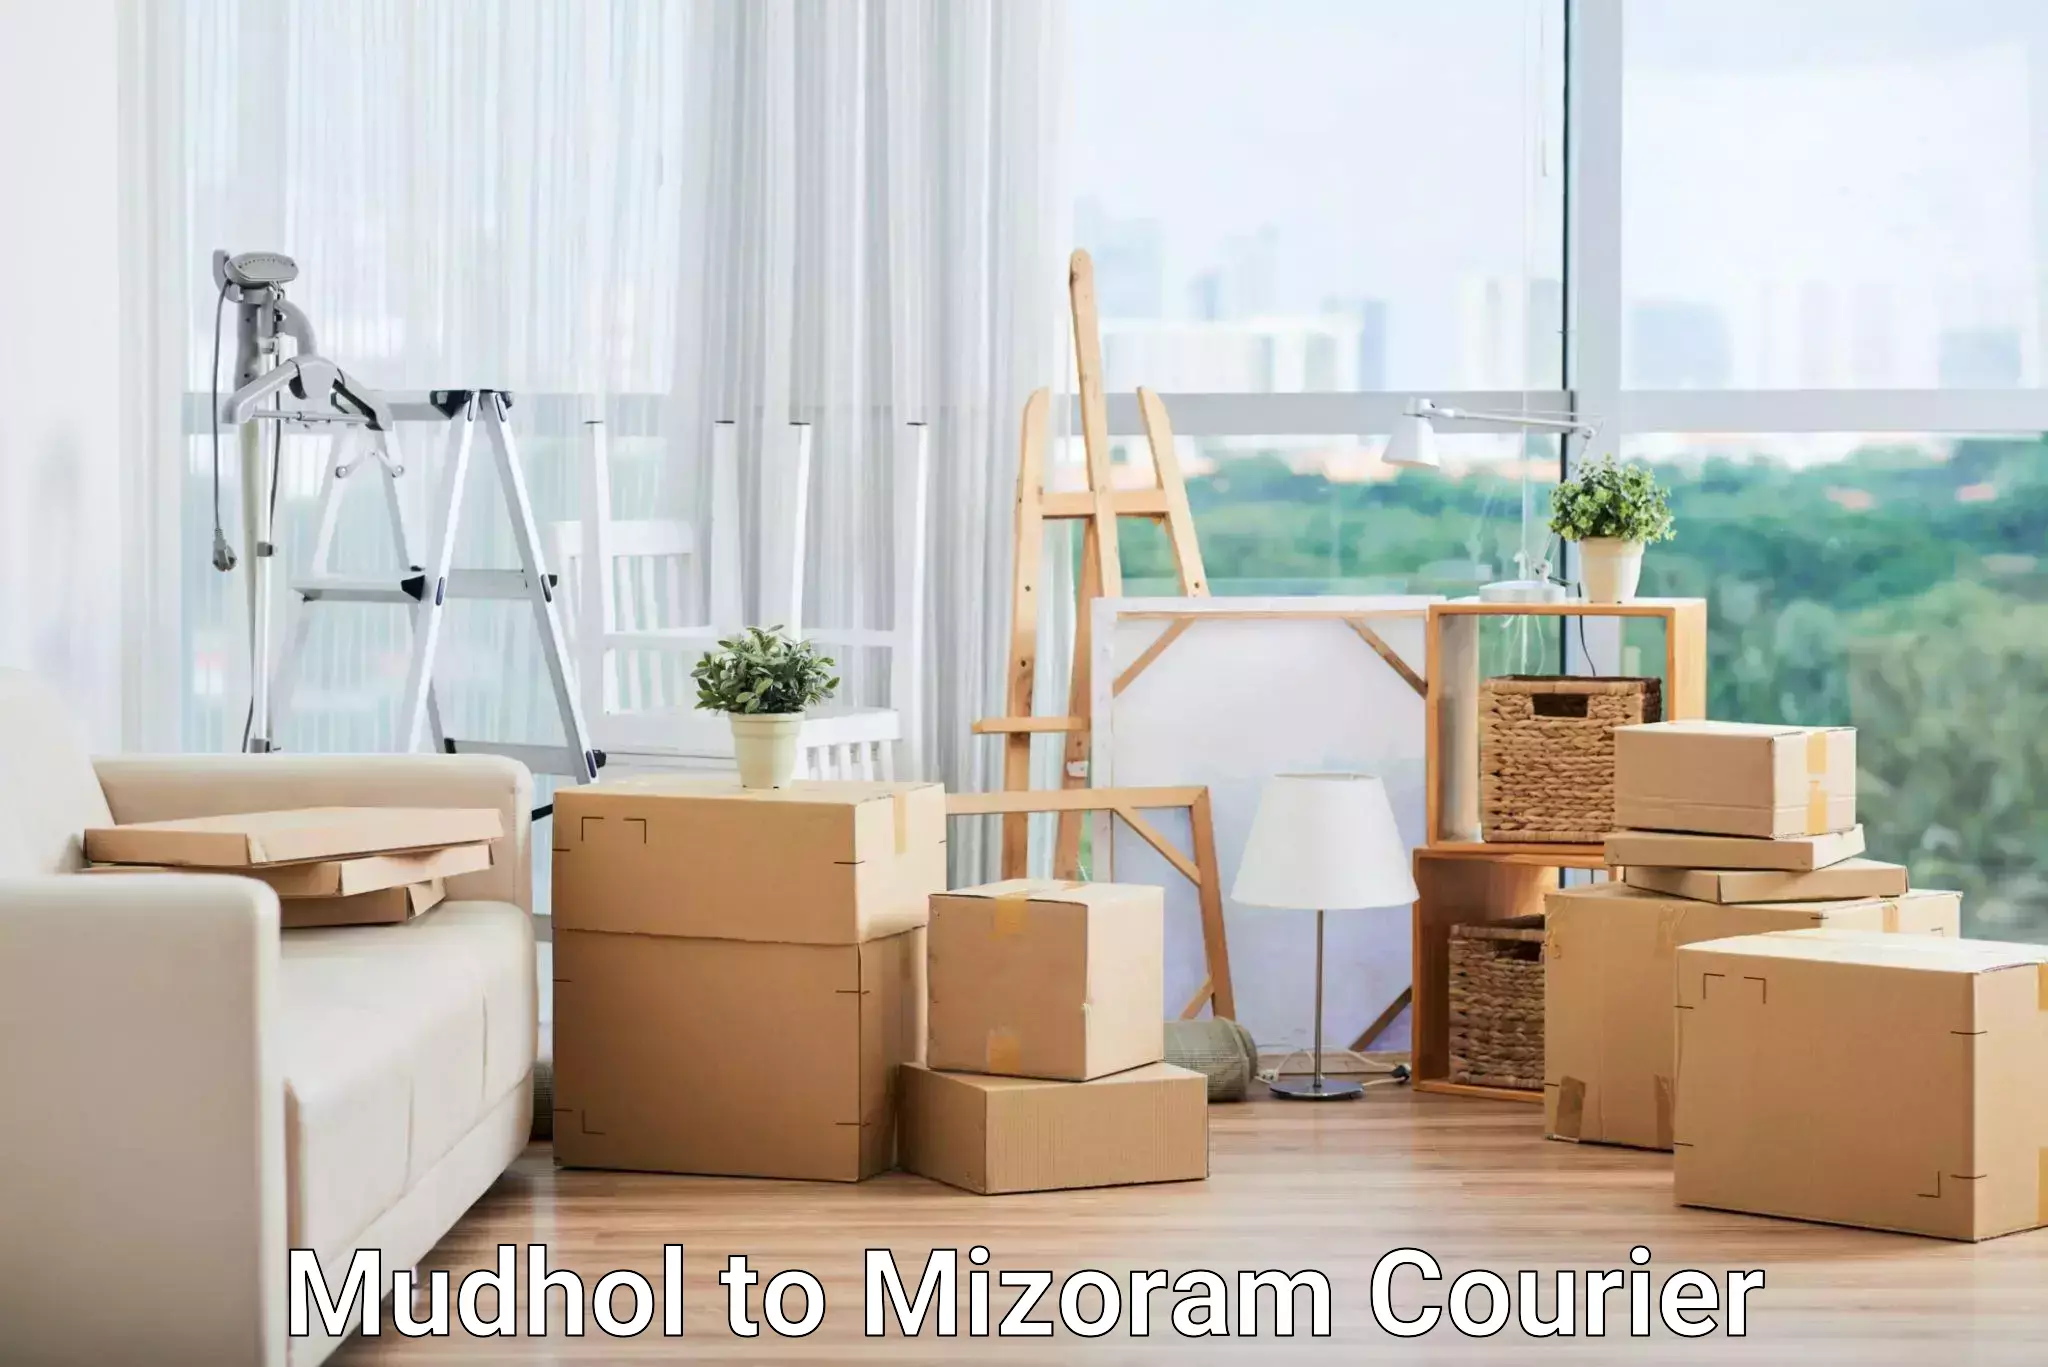 Fast delivery service in Mudhol to Darlawn